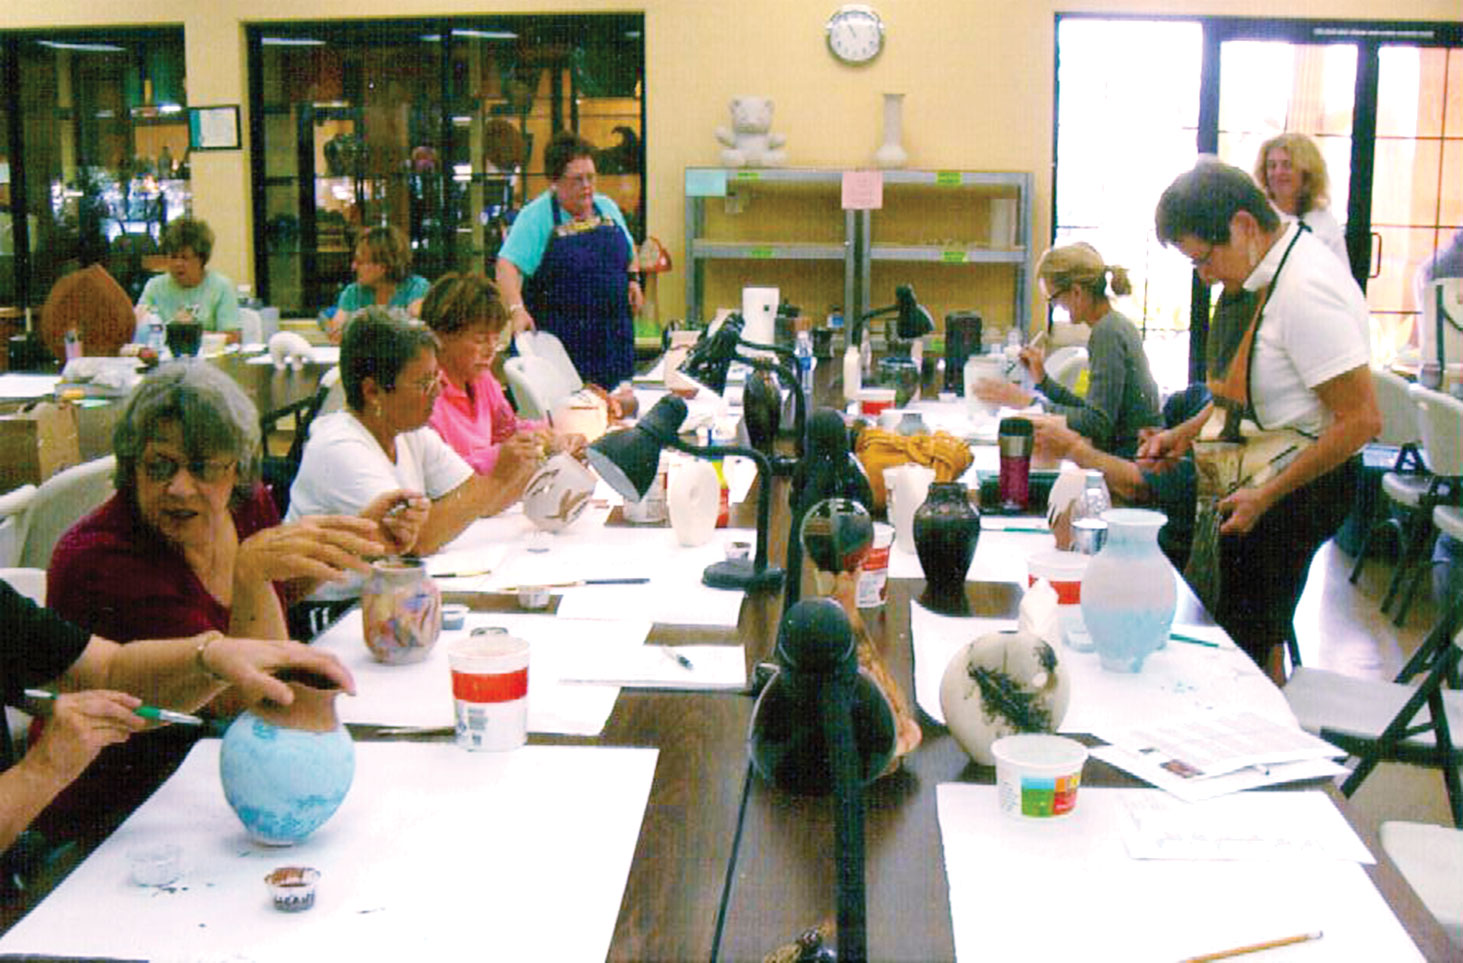 Ceramic members use various techniques, paints and glazes.